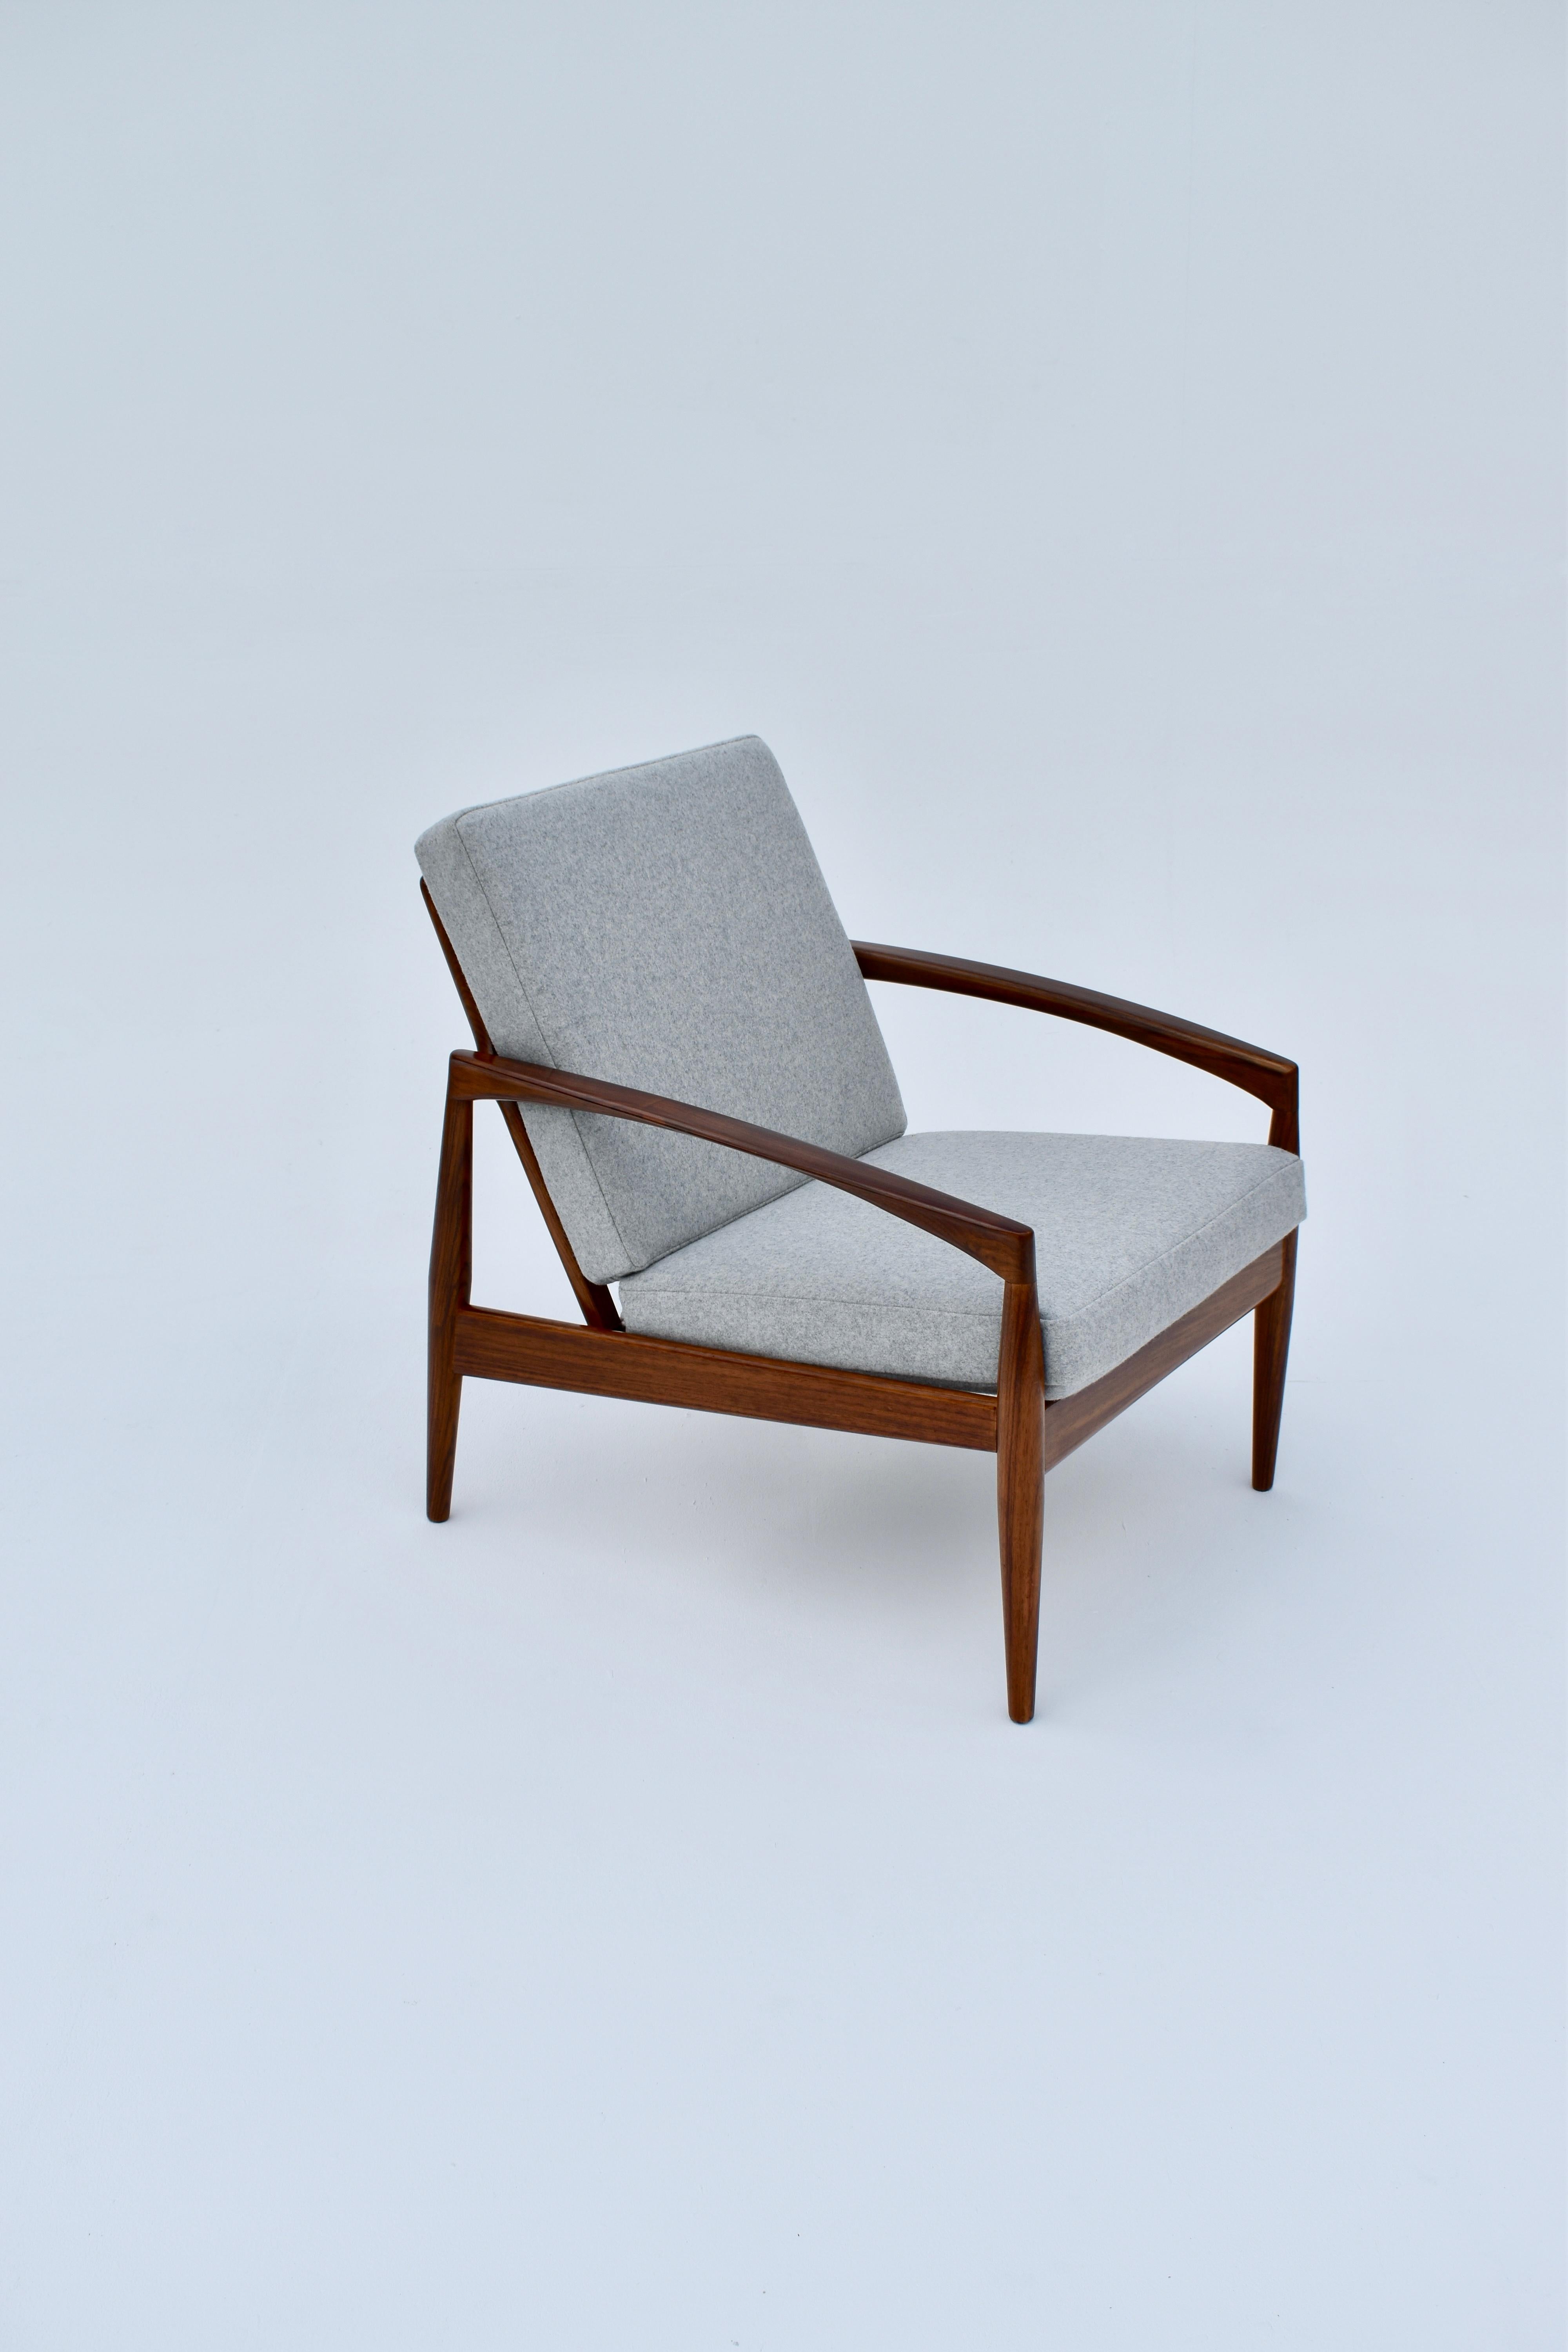 One of Kai Kristiansens most recognizable and celebrated designs. The Paperknife chair designed in 1956 has long been a favourite item for us to stock. It is an exceptionally handsome chair and very much deserves the design classic status it has now